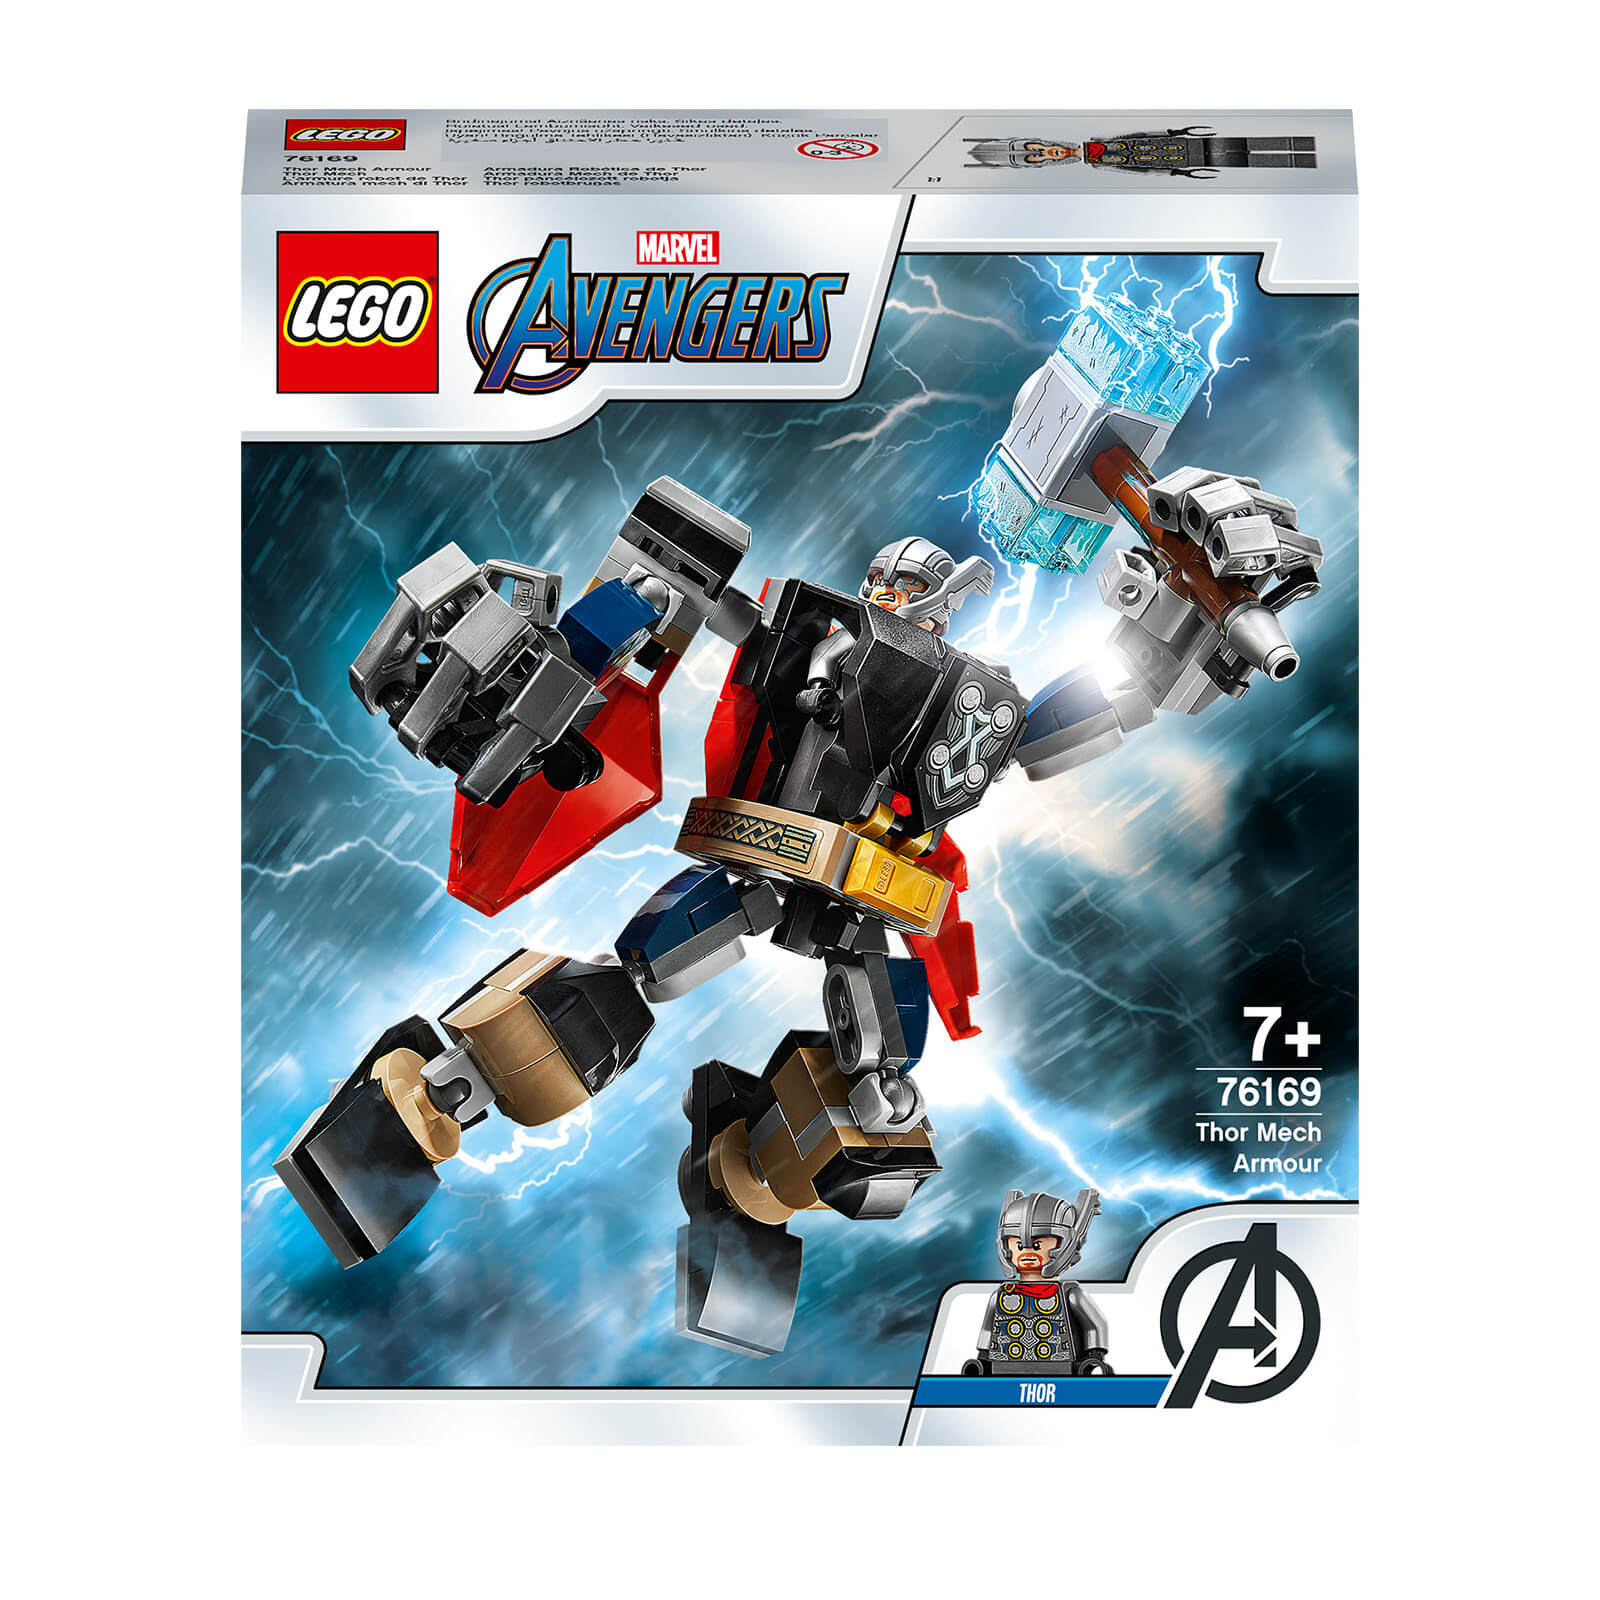 LEGO Super Heroes: Marvel Avengers Thor Mech Armour Toy (76169)